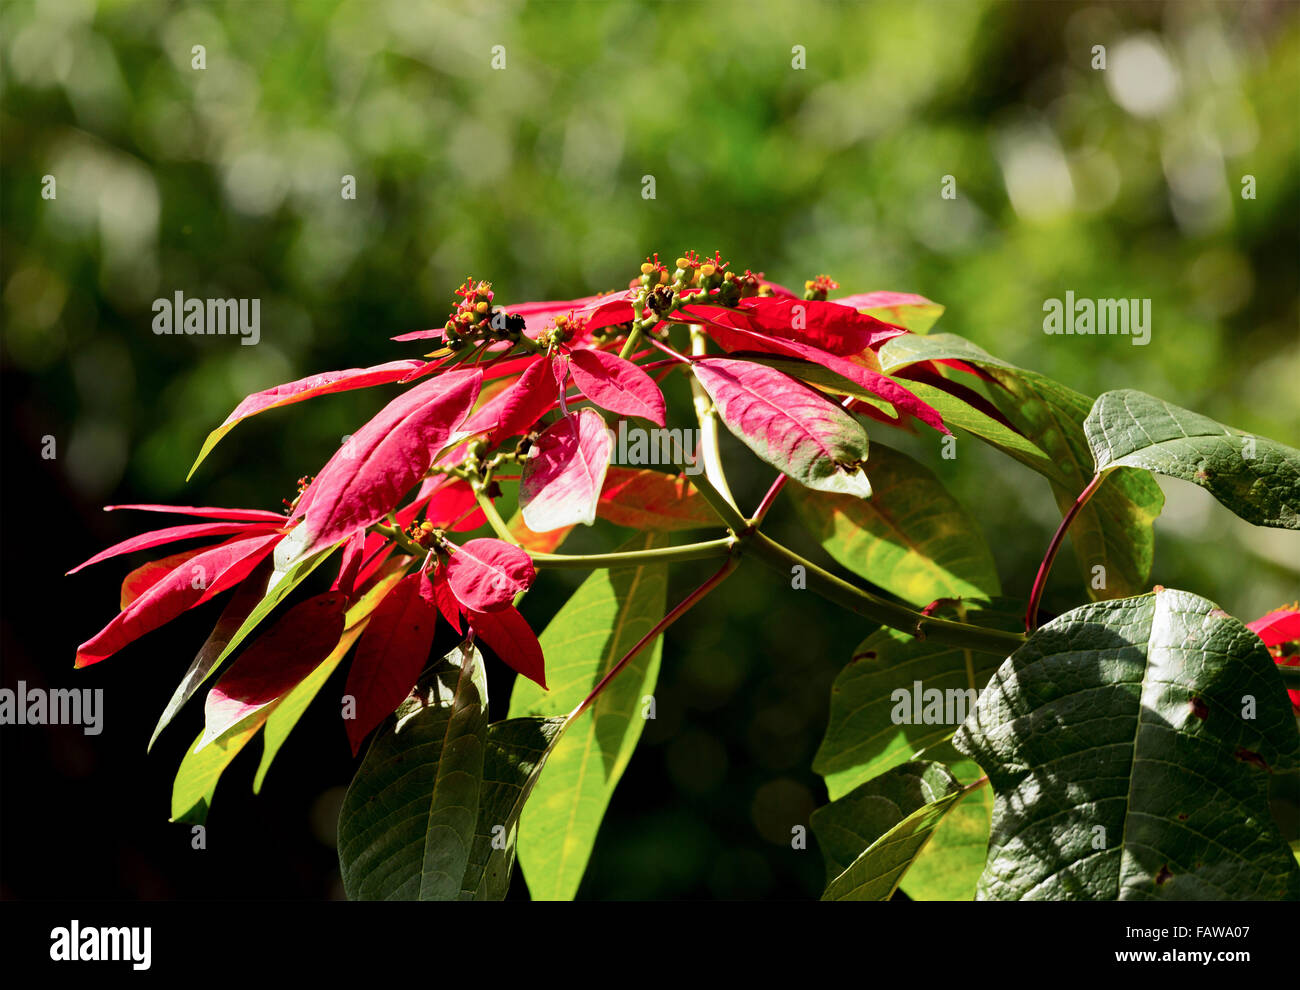 Wild growing winter rose with blossoms in its natural environment in Bali, Indonesia Stock Photo